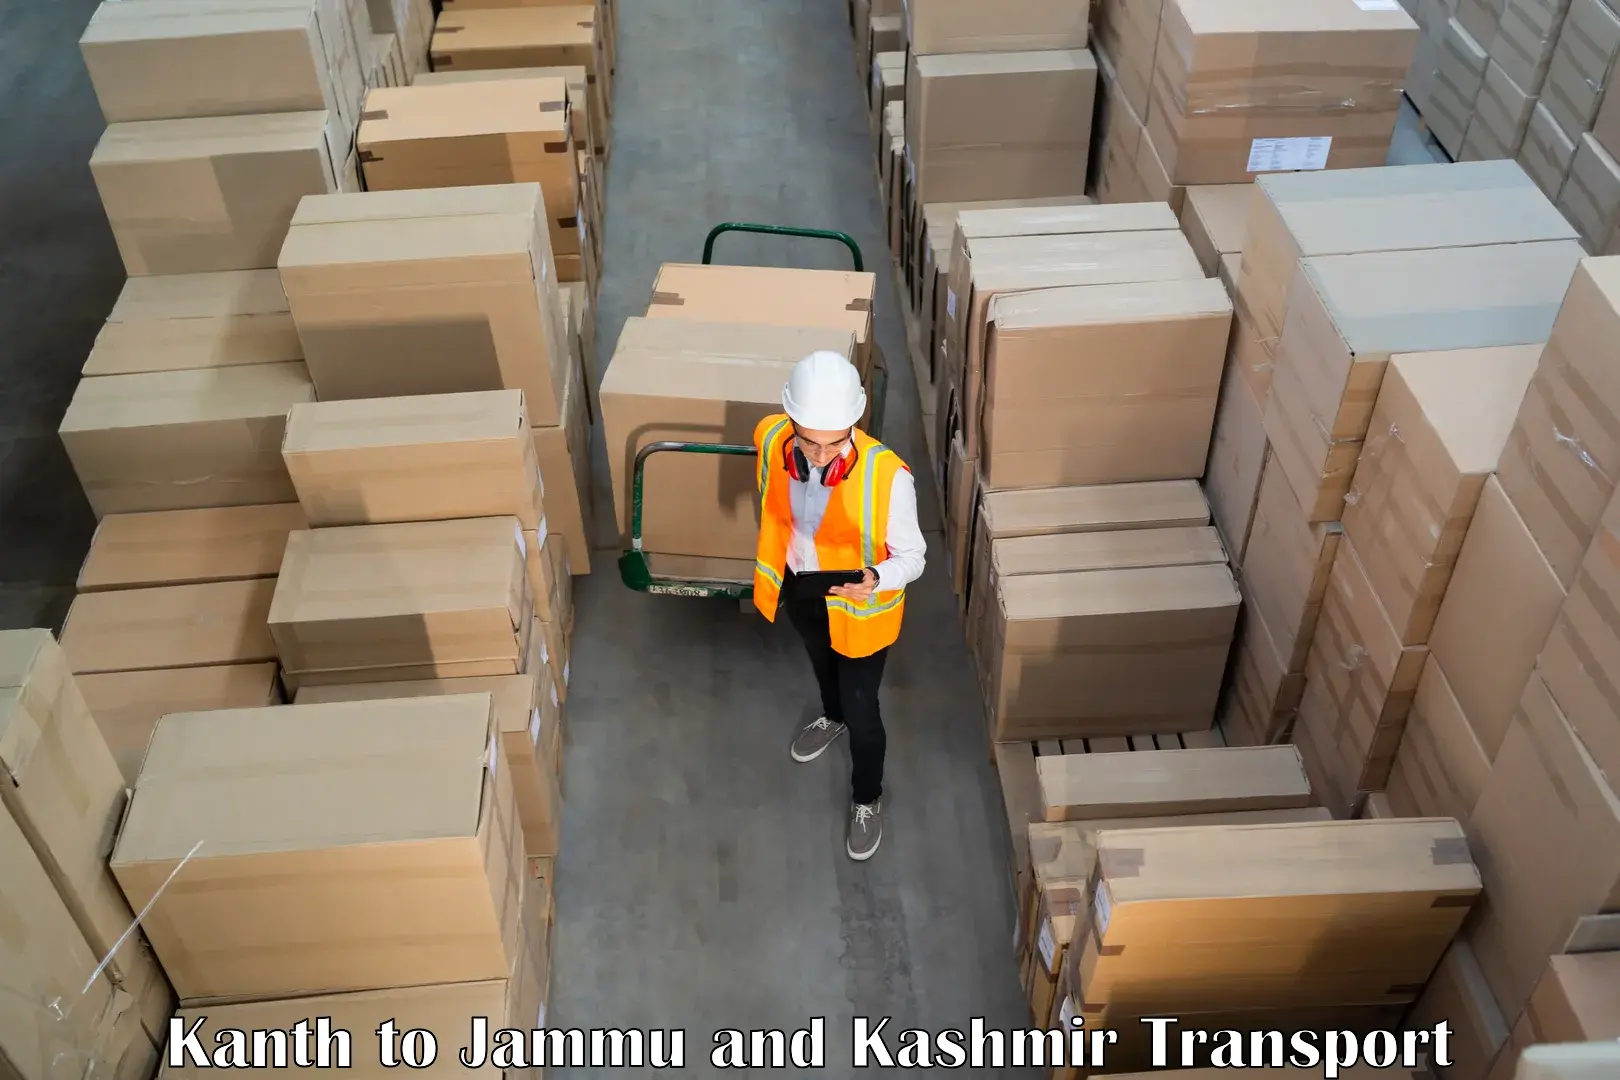 Cargo train transport services Kanth to Udhampur